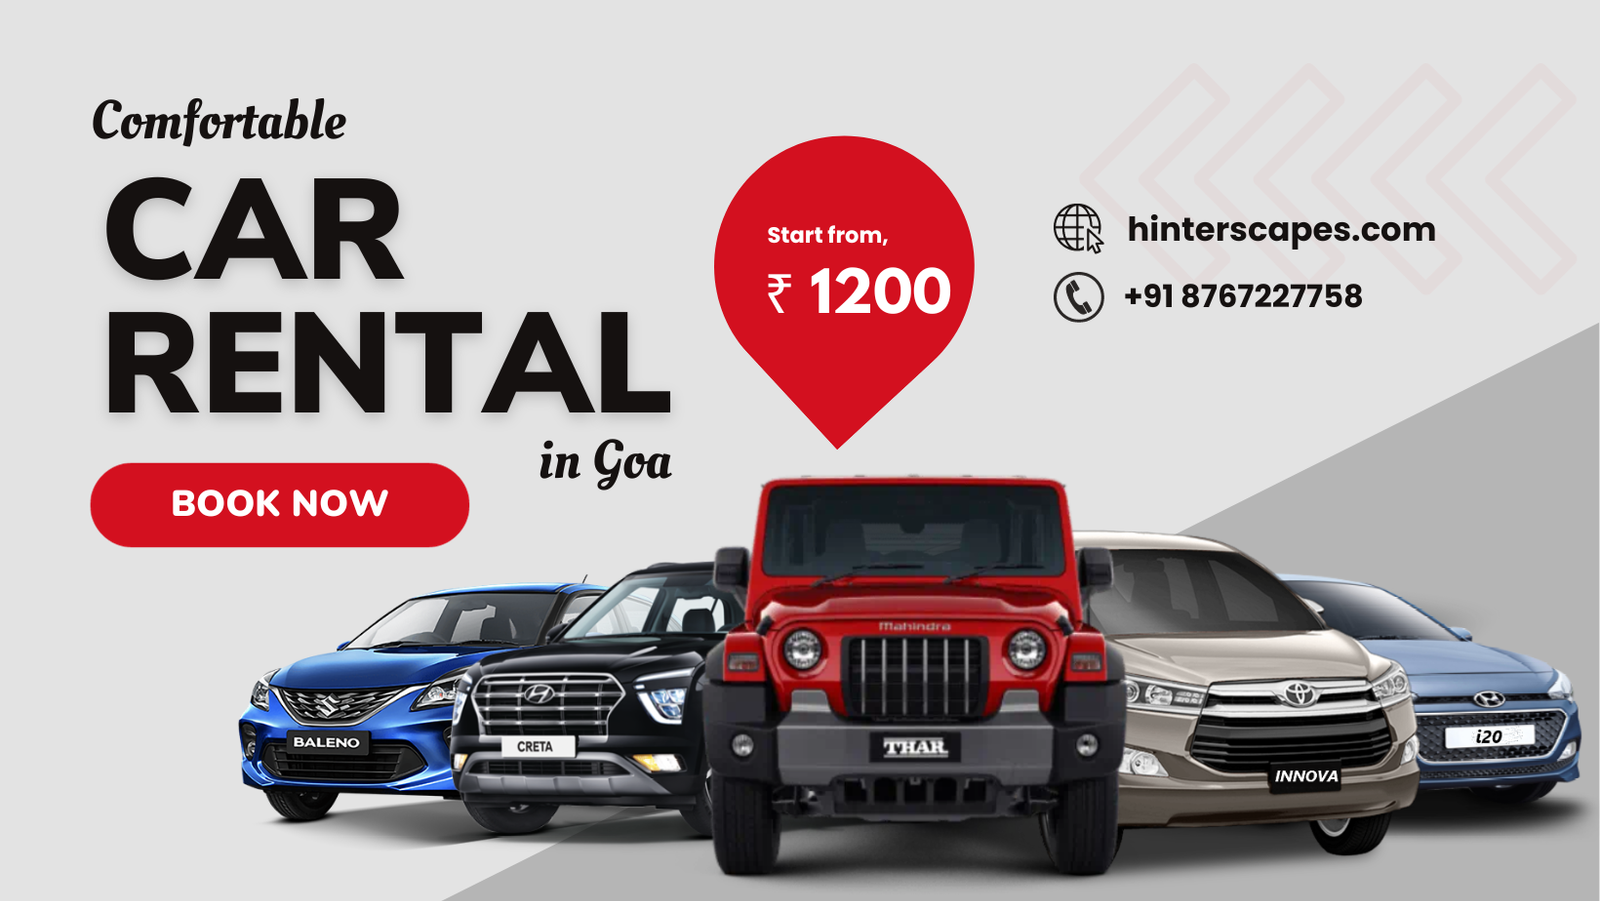 Book the Finest Goa Rental Cars at Budget-Friendly Rates